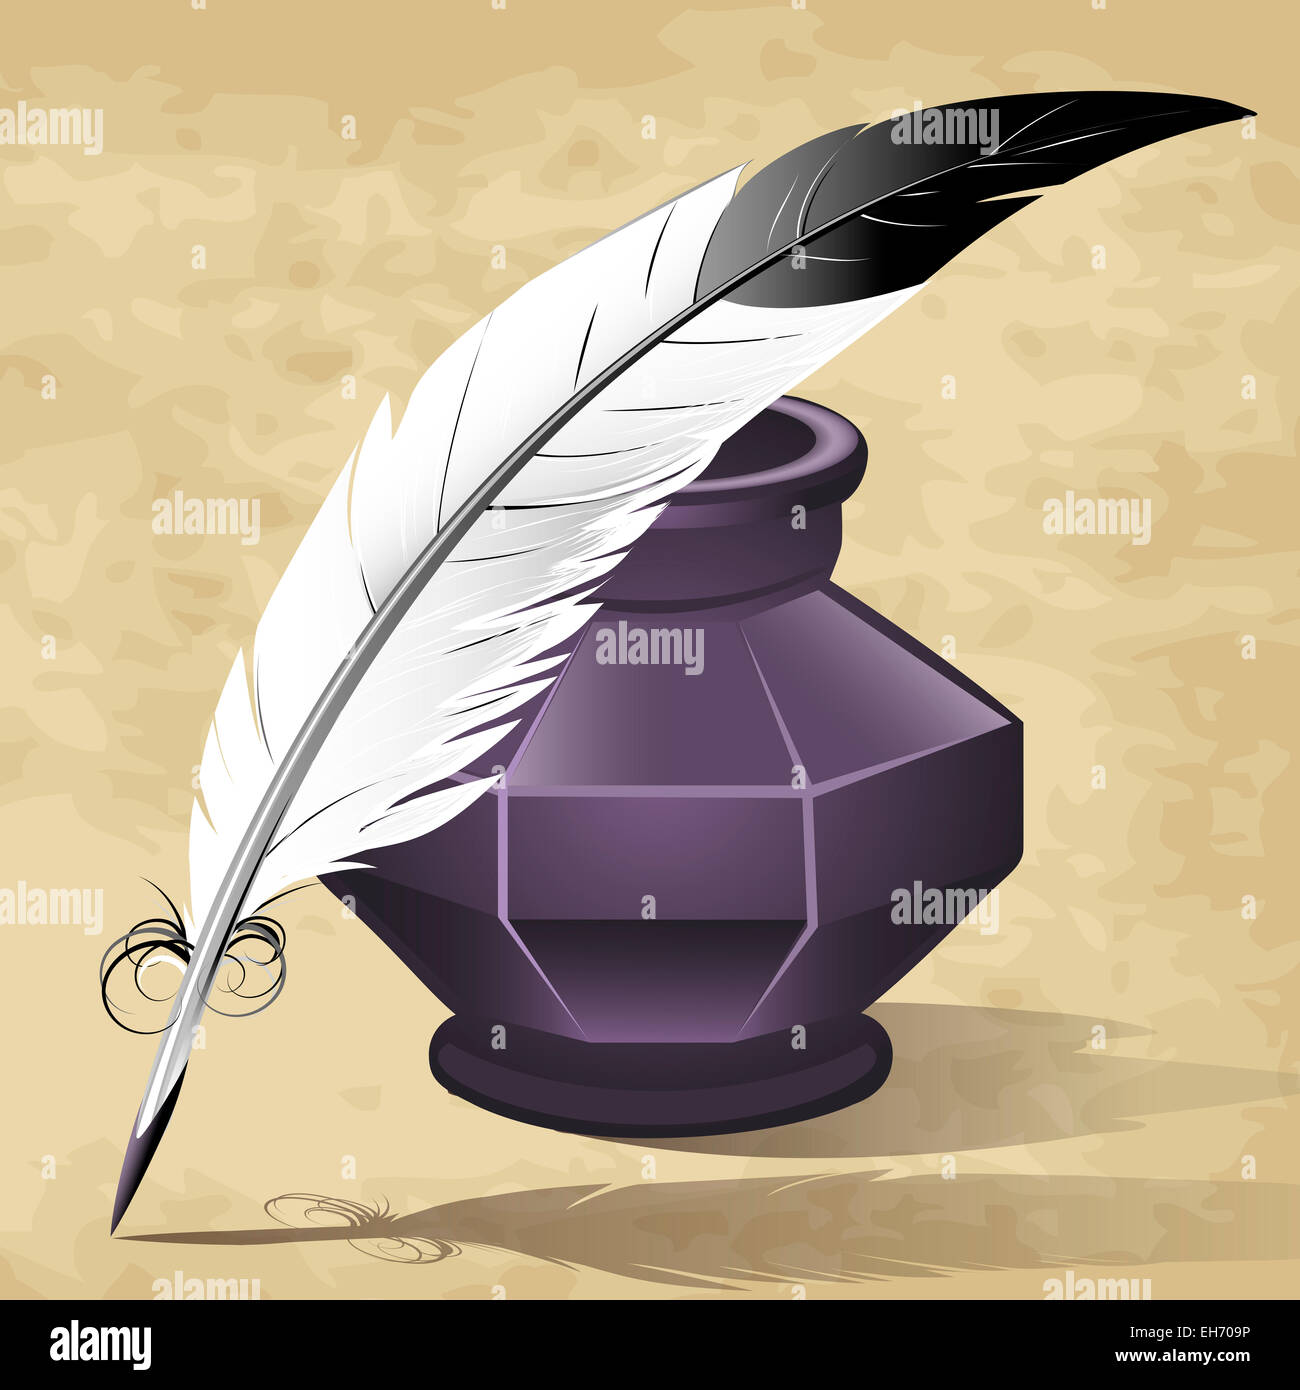 Illustration with quill pen and ink pot drawn in retro style Stock Photo